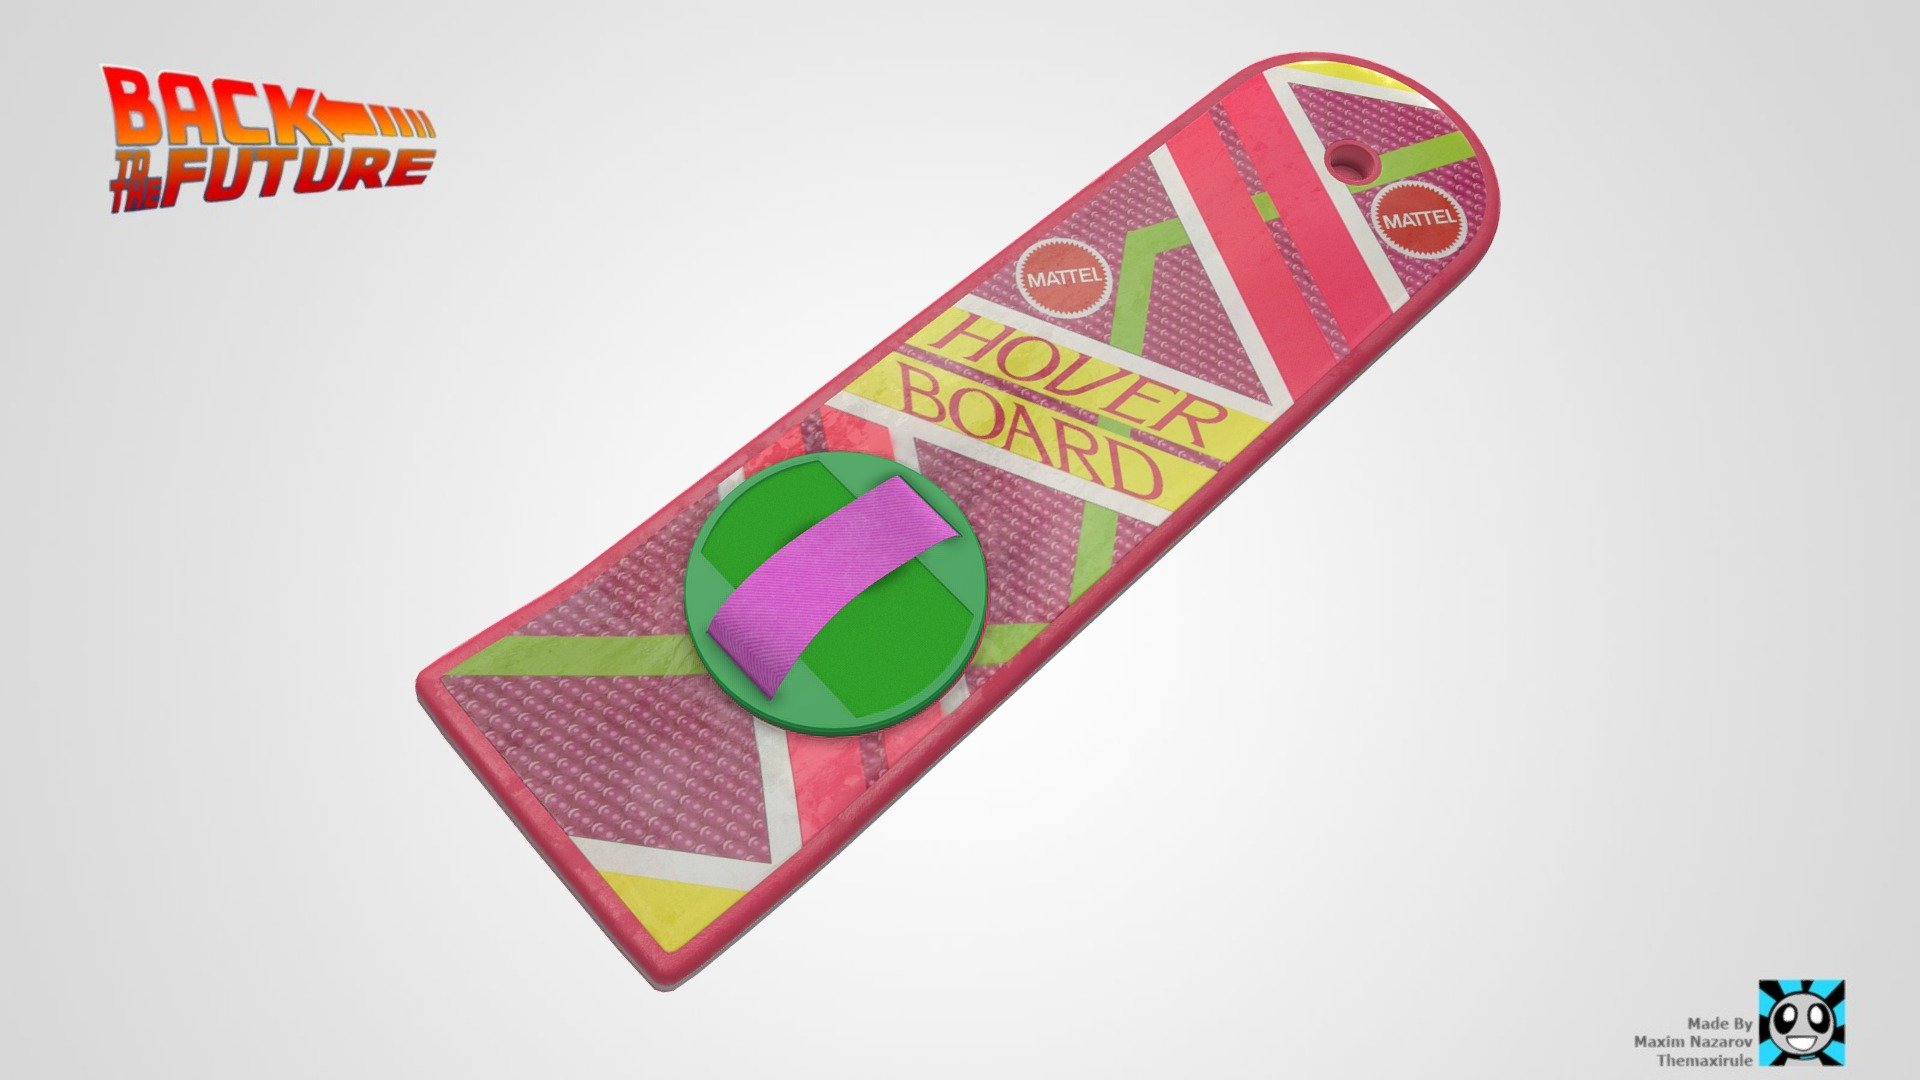 HoverBoard model from Back to the Future franchise

Tried to make it as realistic as in a movie

Modeling in Blender 3D 

Texturing using Substance Painter and Adobe Photoshop

Hope you like it !) - HoverBoard - Back to the Future - Buy Royalty Free 3D model by themaxirule 3d model